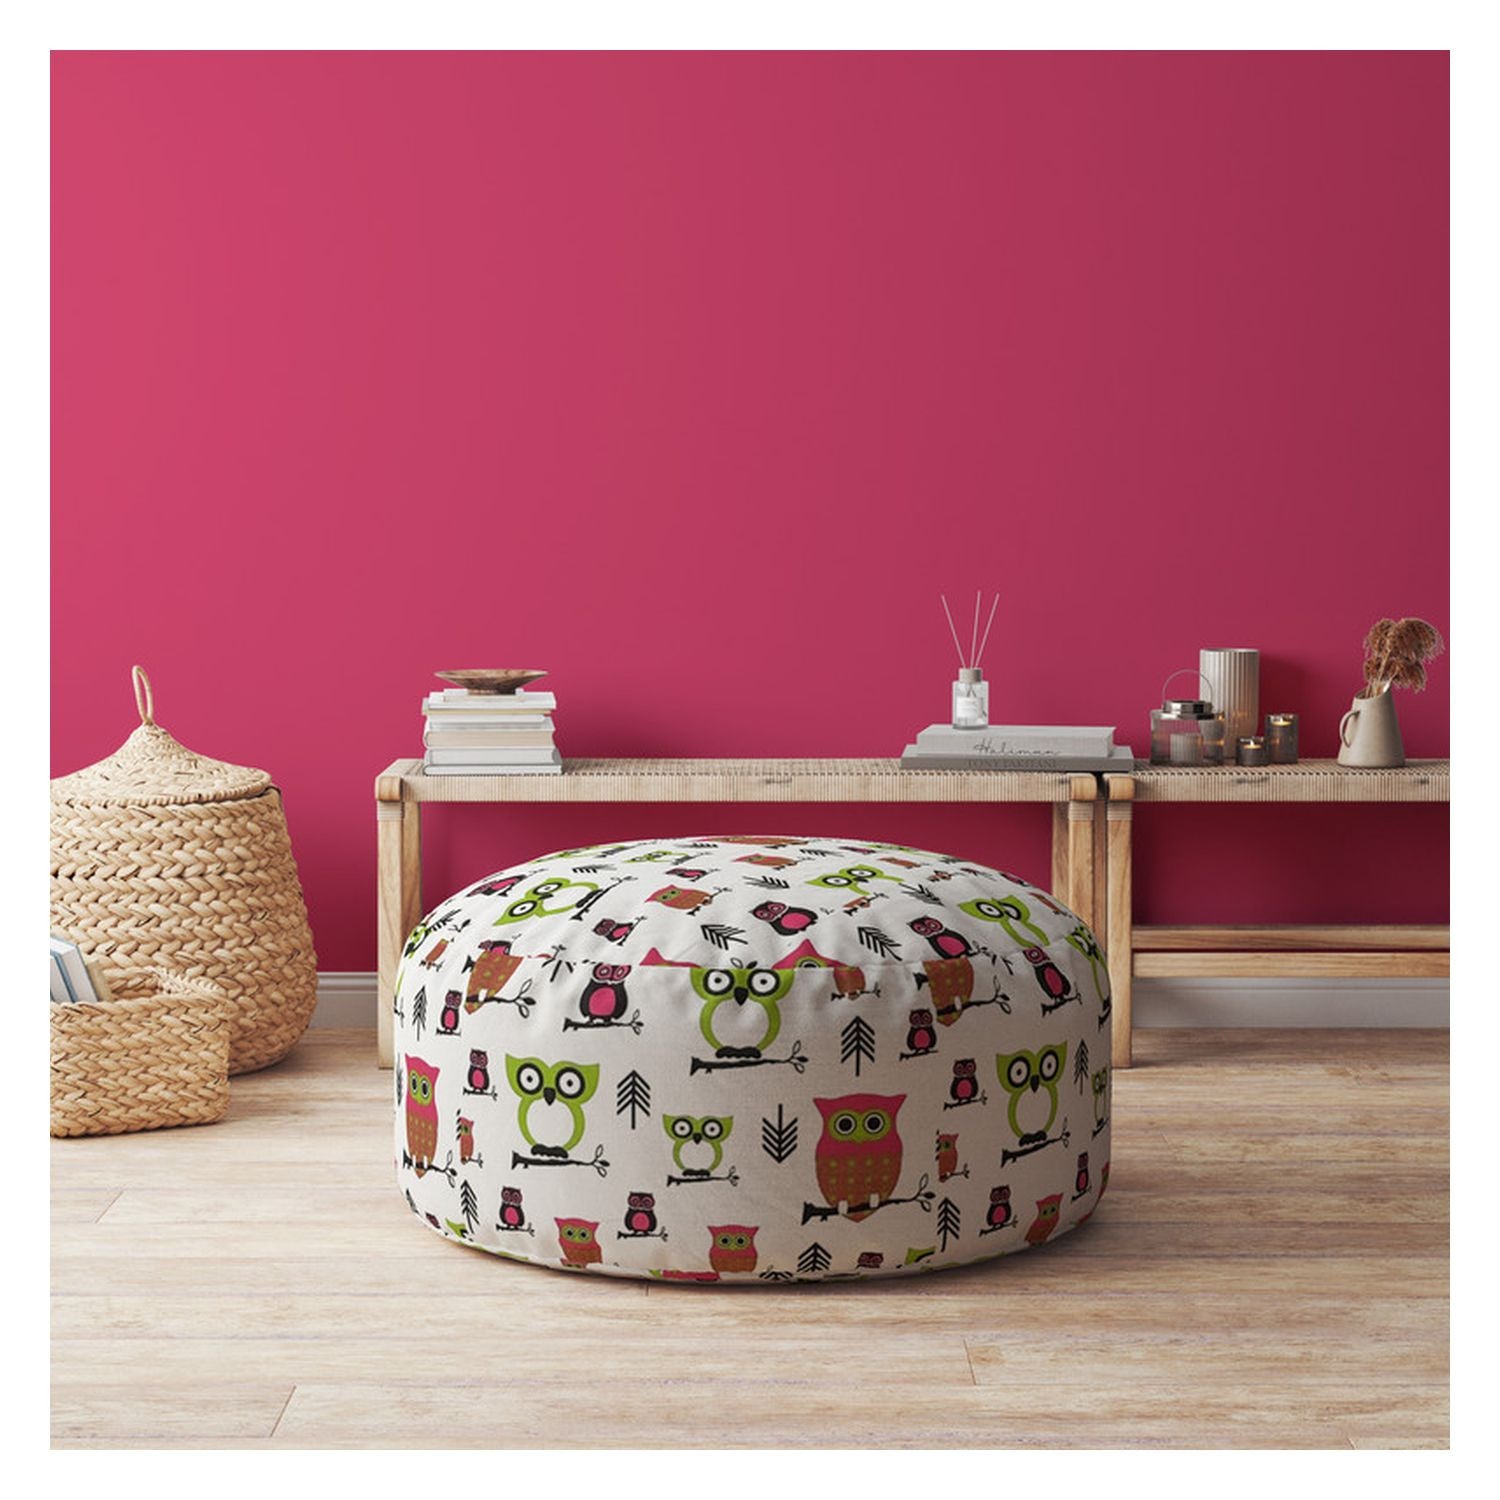 24" Pink And White Cotton Round Owls Pouf Cover